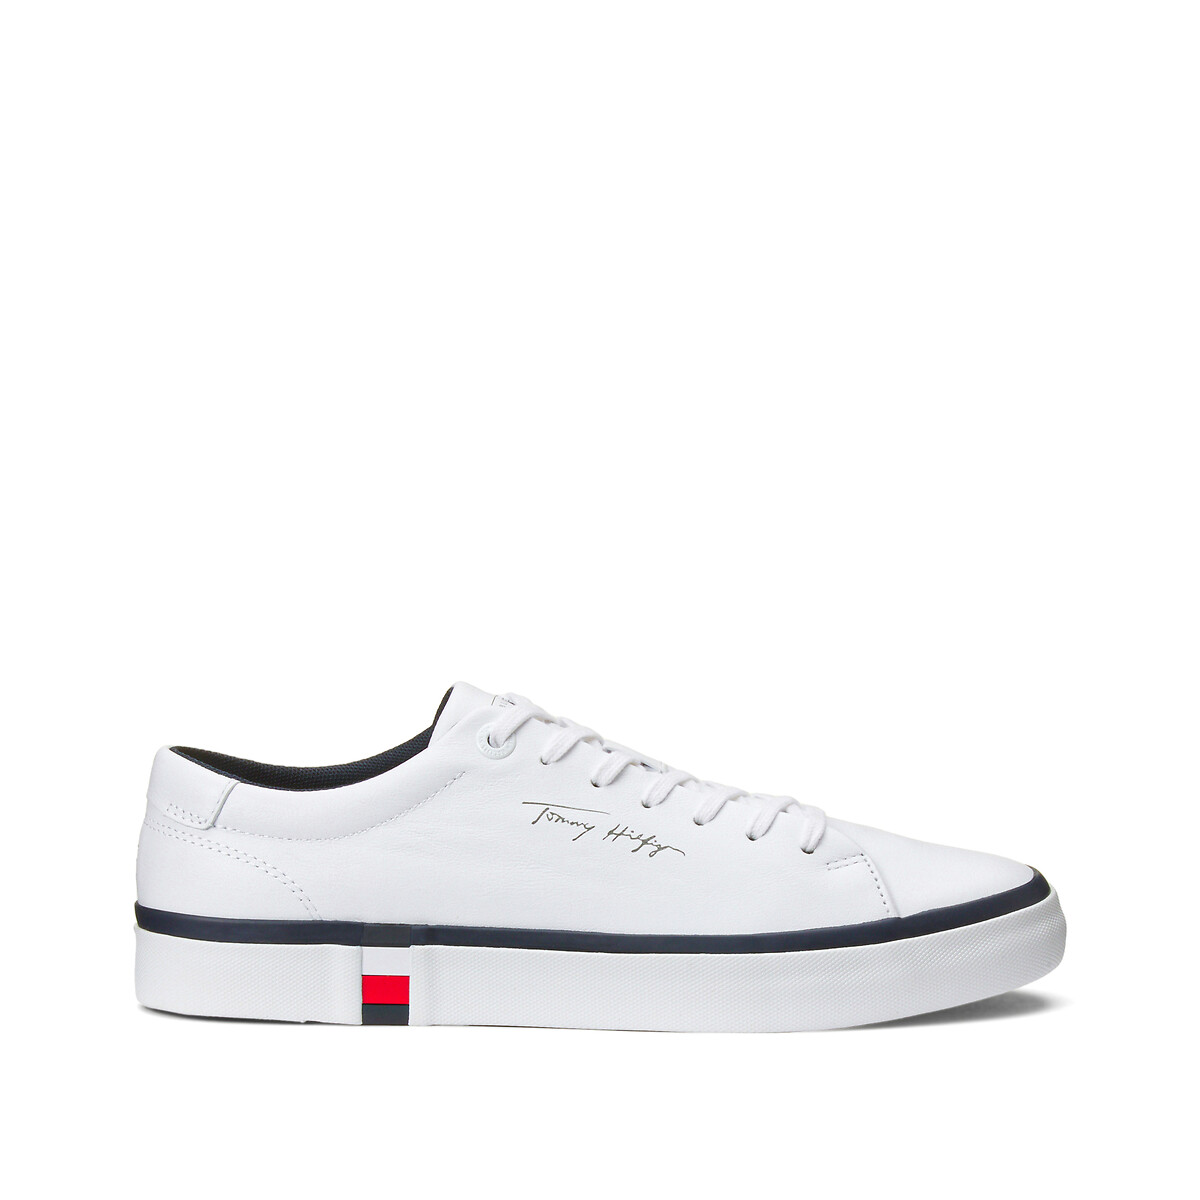 Image of Corporate Leather Vulcanized Trainers